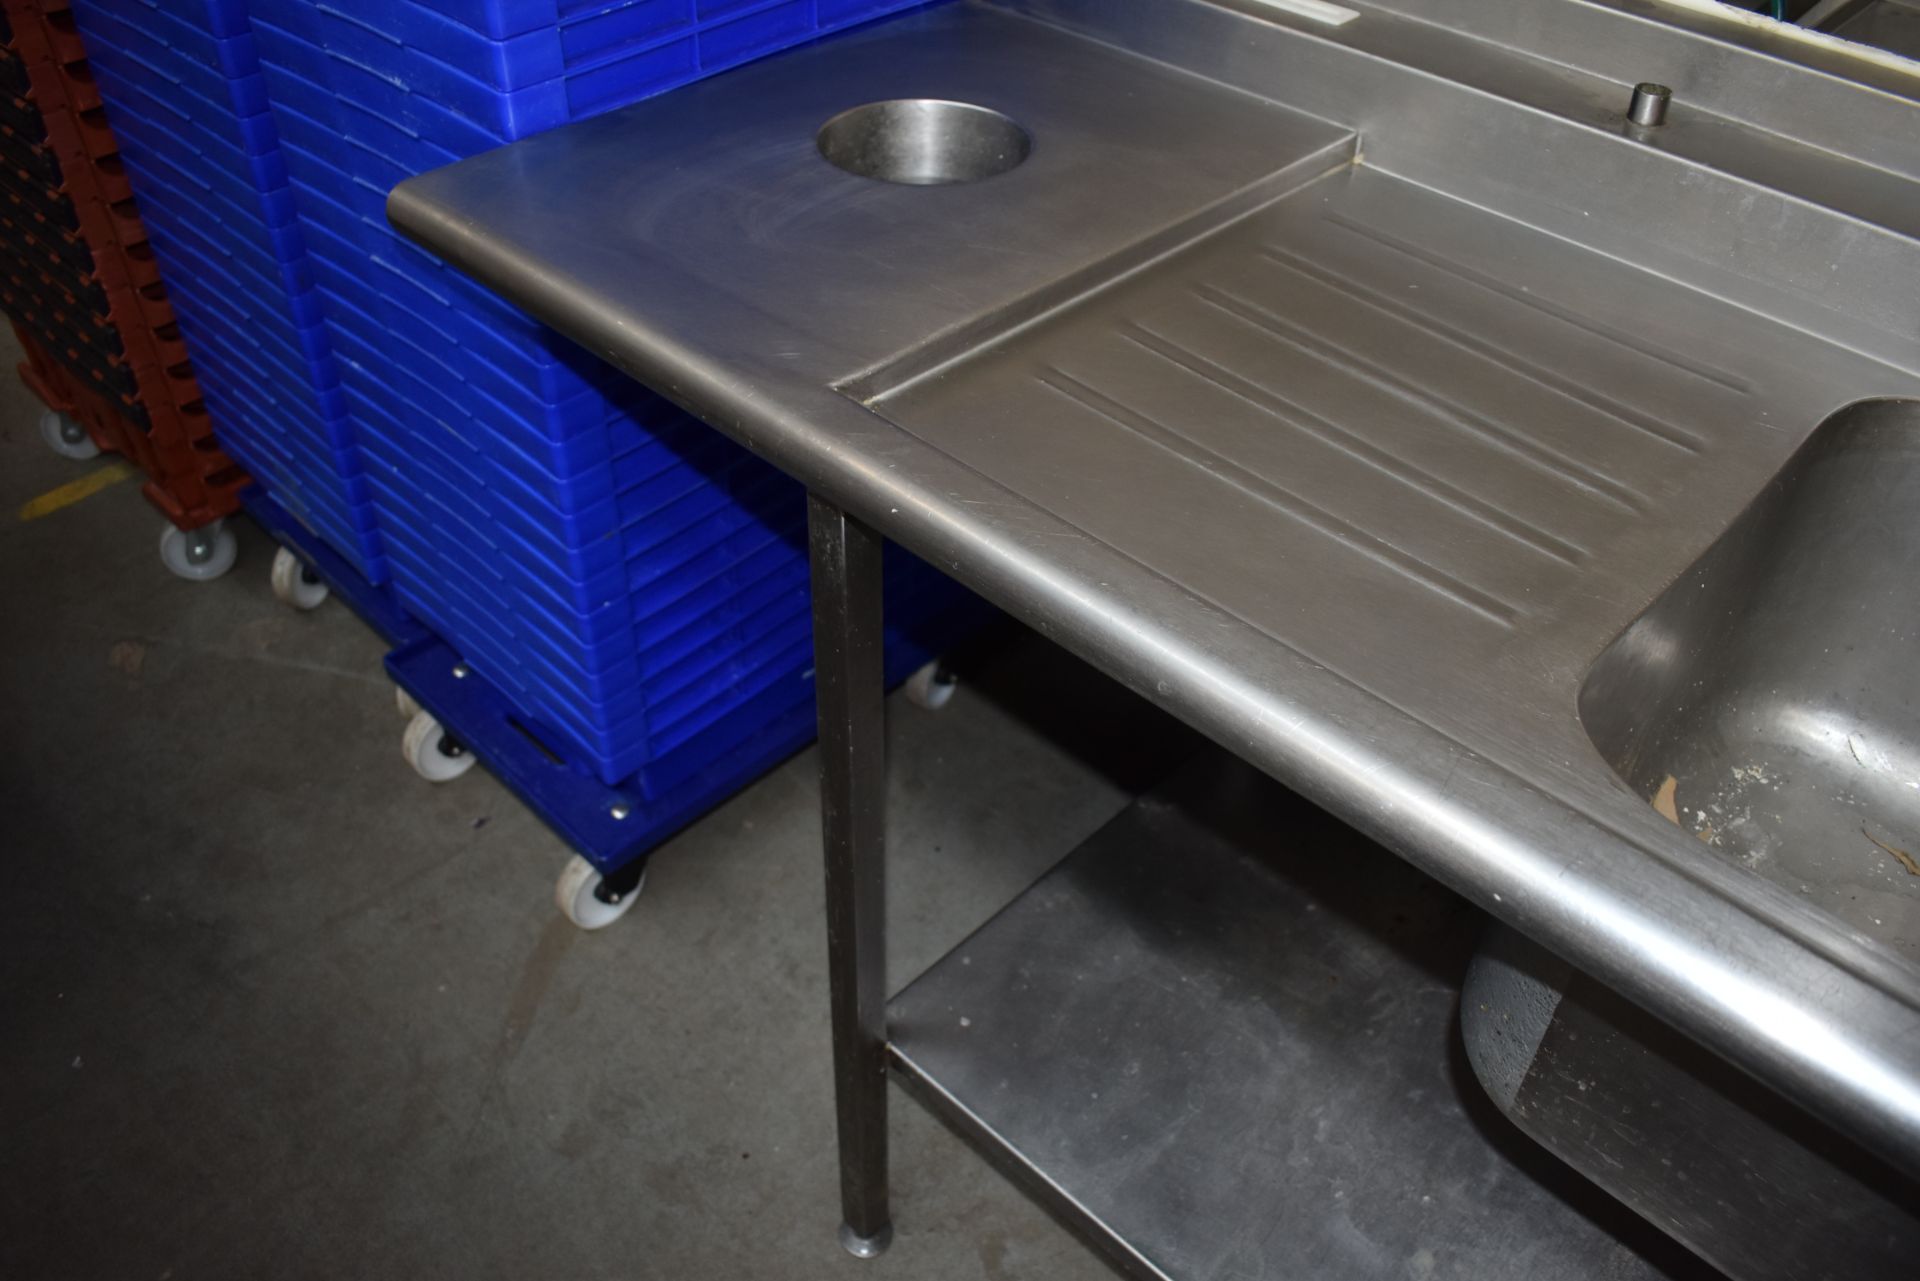 1 x Stainless Steel Commercial Wash Basin Unit With Twin Sink Bowl and Drainers, Mixer Taps, Spray - Image 4 of 12